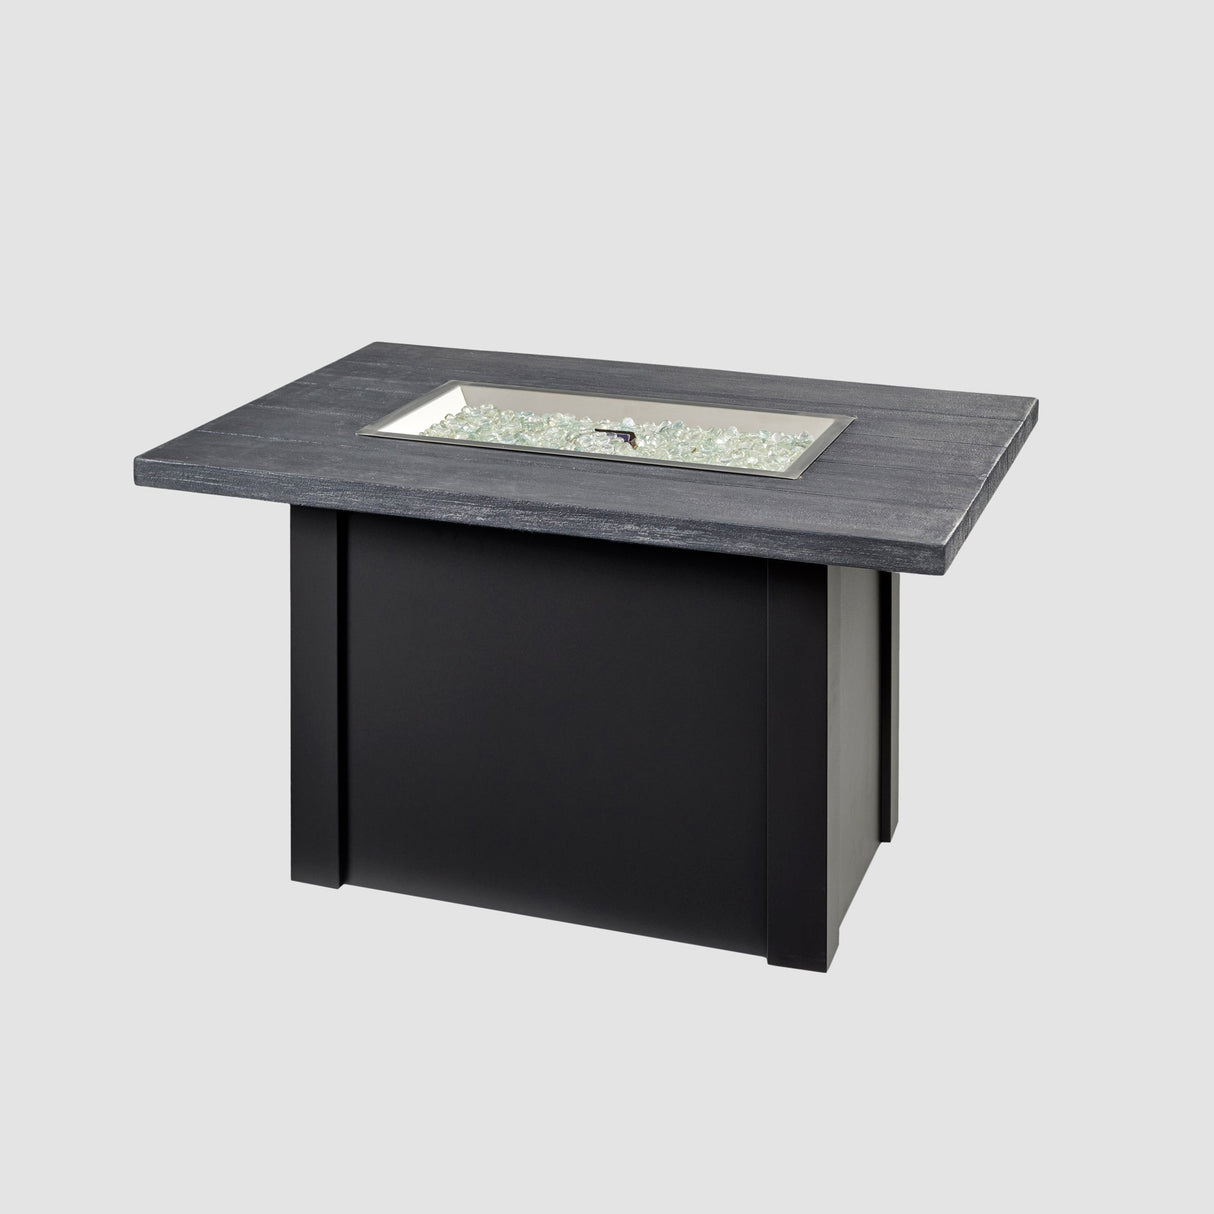 Fire media placed on the burner of a Havenwood Rectangular Gas Fire Pit Table with a Carbon Grey top and Luverne Black base